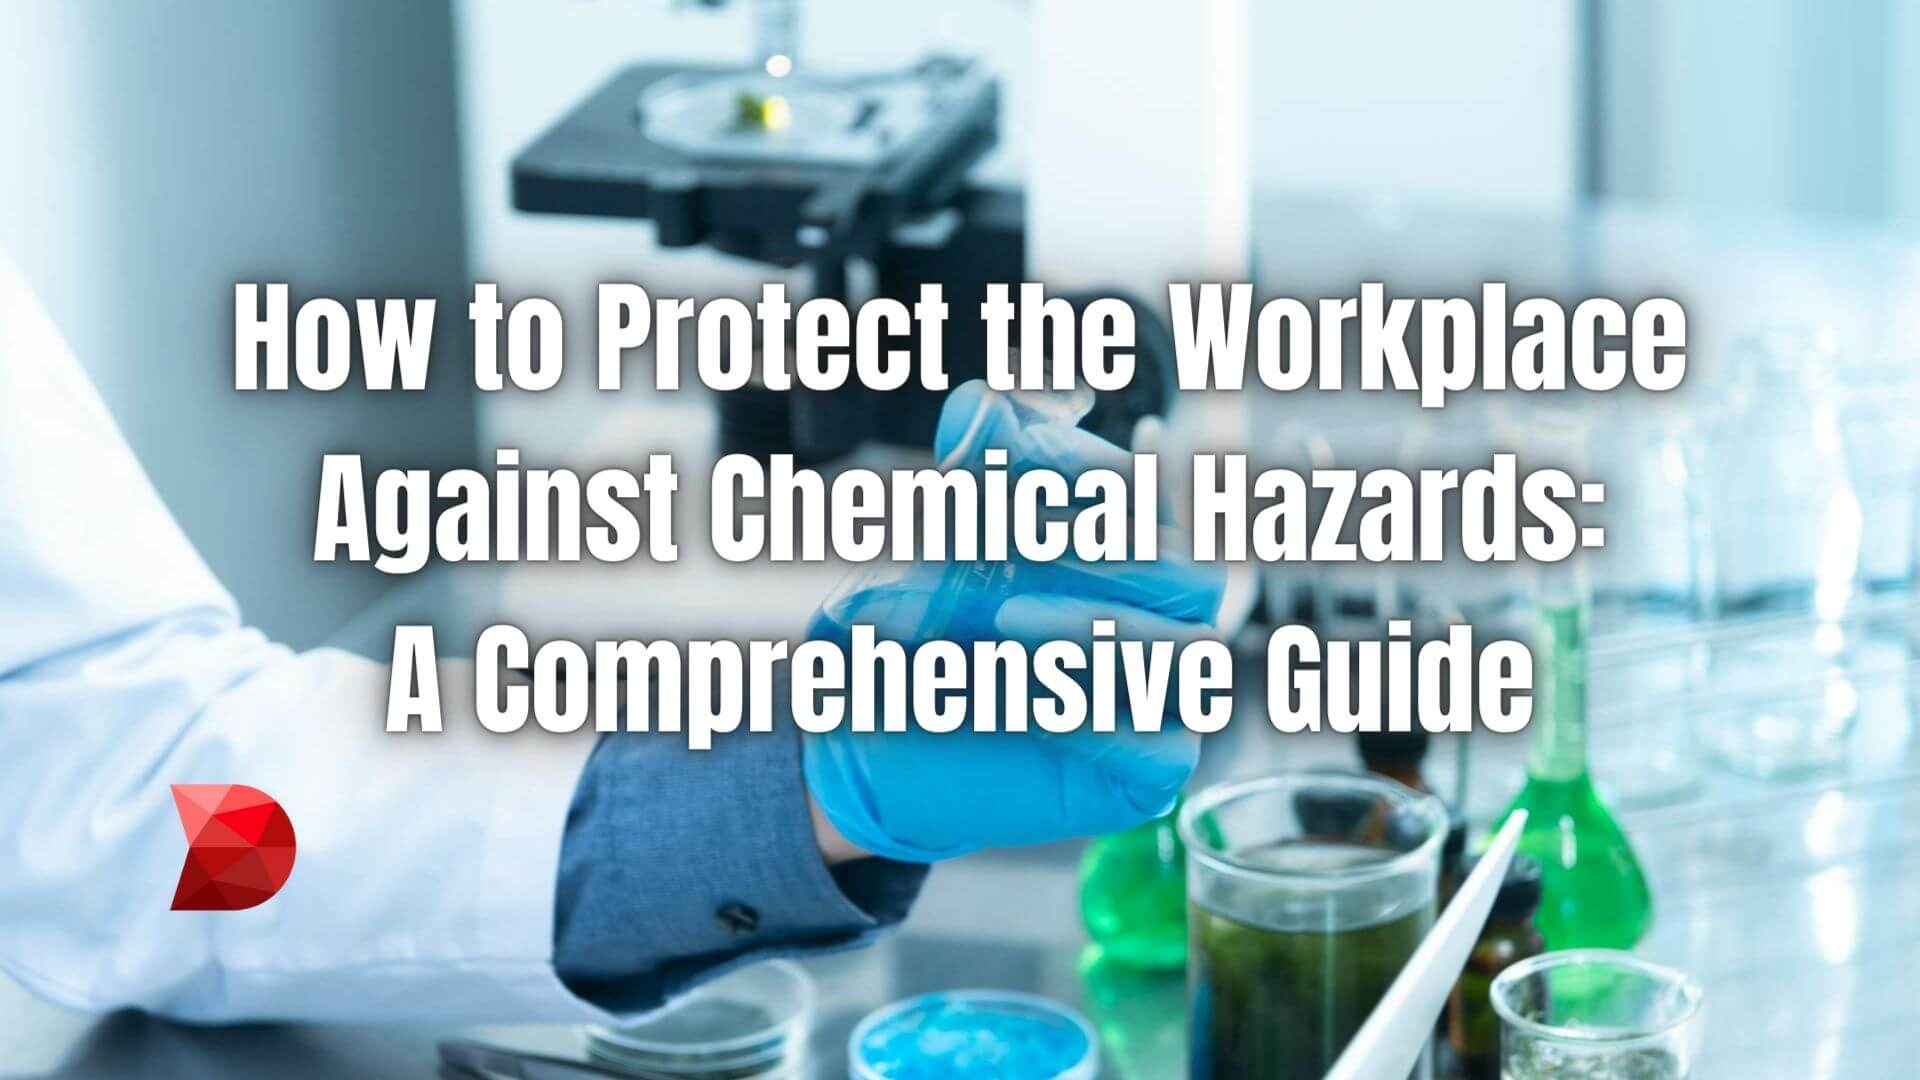 Navigate the complexities of workplace safety. Click here to learn how to protect your environment from chemical hazards.